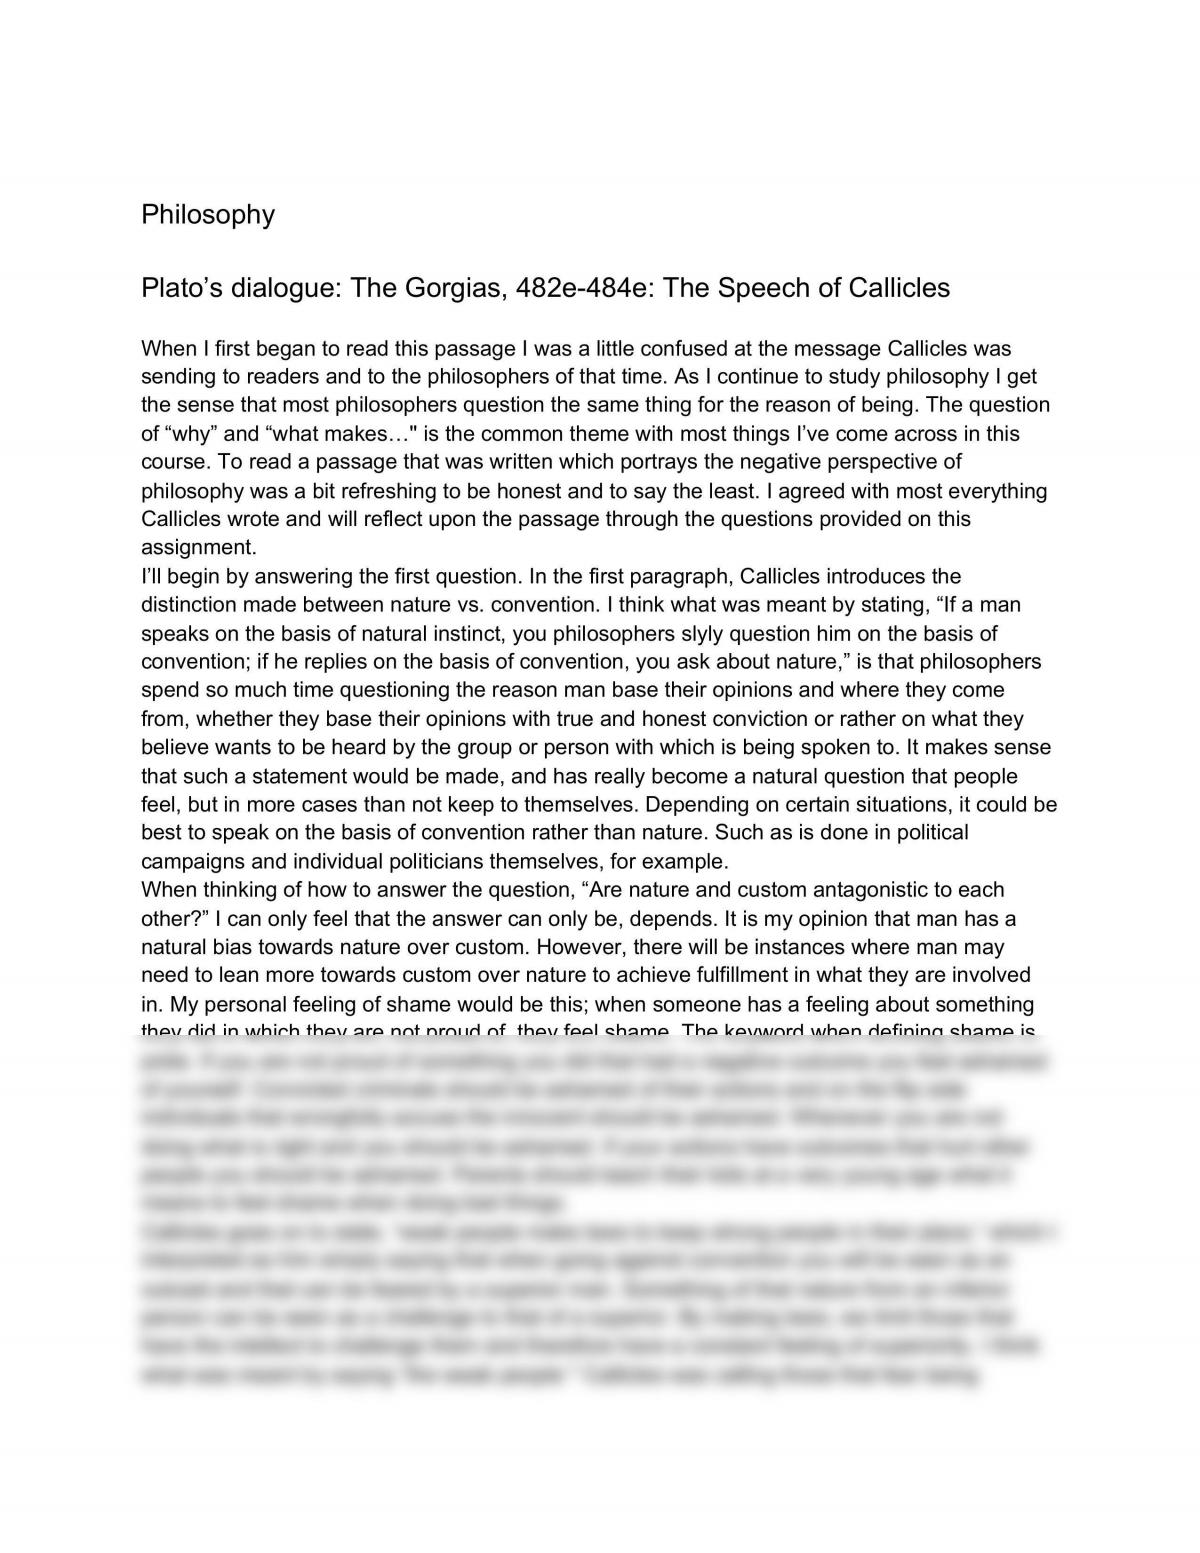 Philosophy, Plato’s dialogue - Page 1